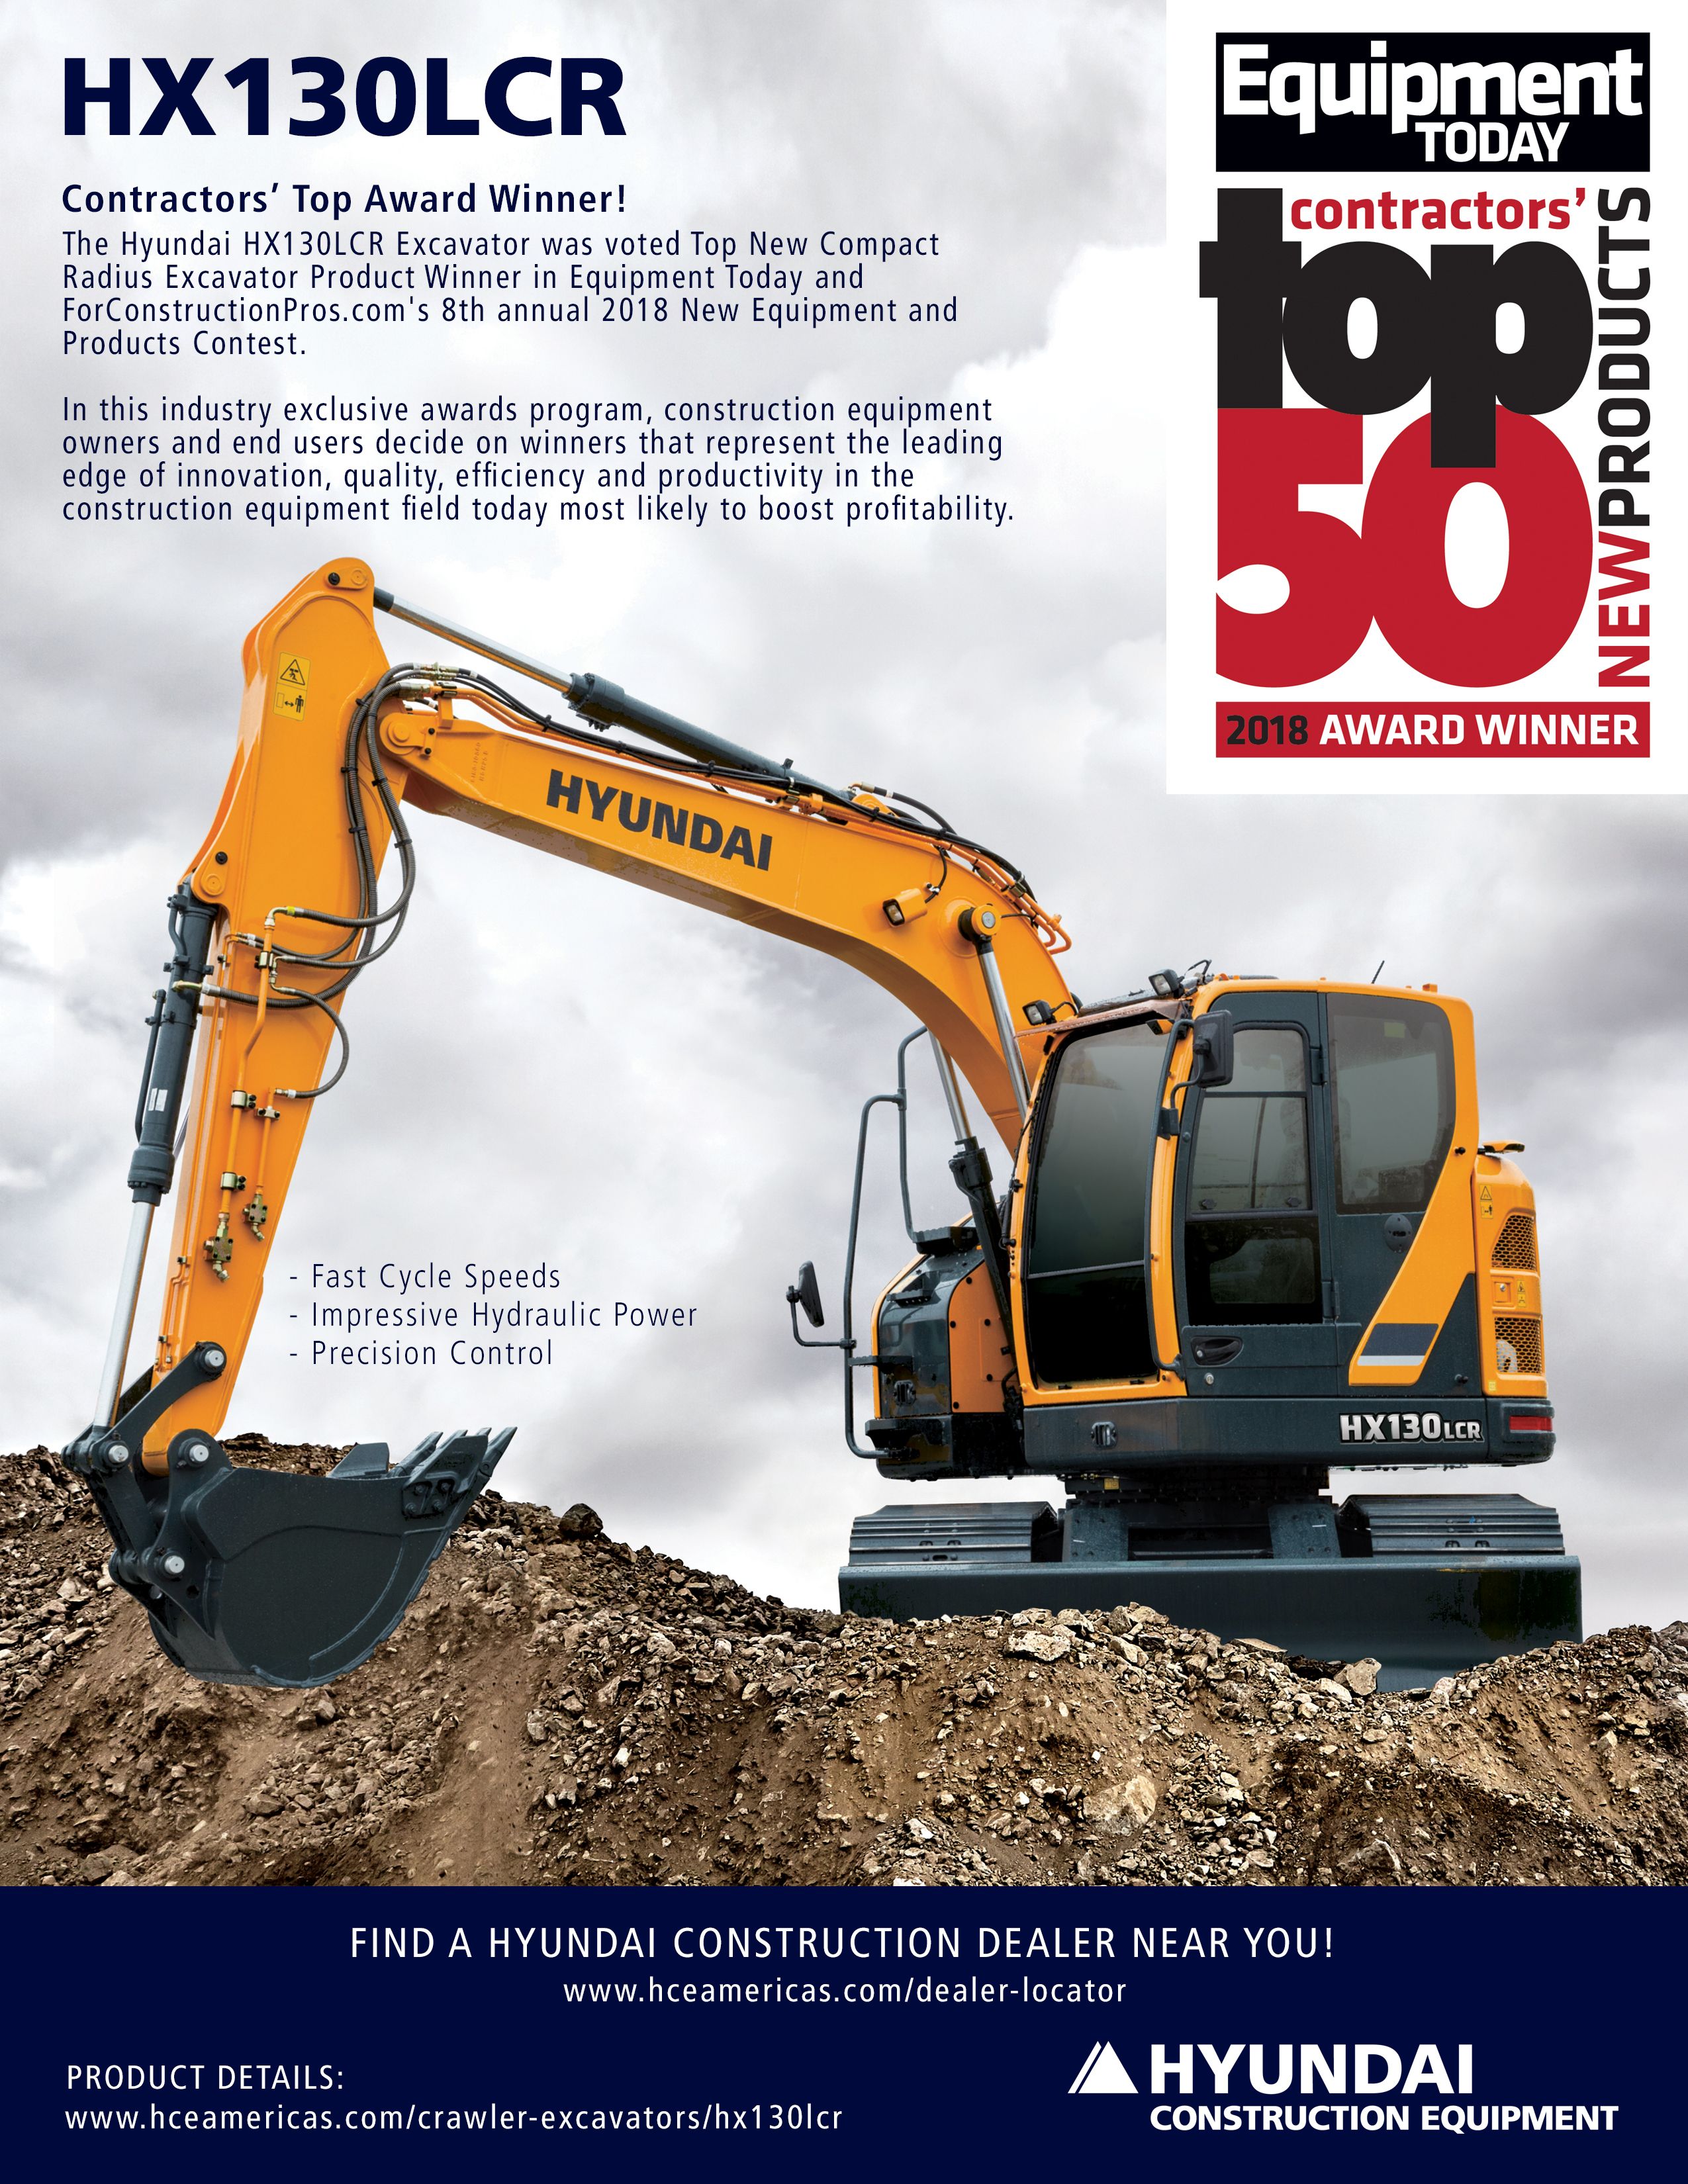 HX130LCR Wins “Top New Compact Radius Excavator Award” In Equipment Today & For Construction Pros.com’s 2018 Annual Contest